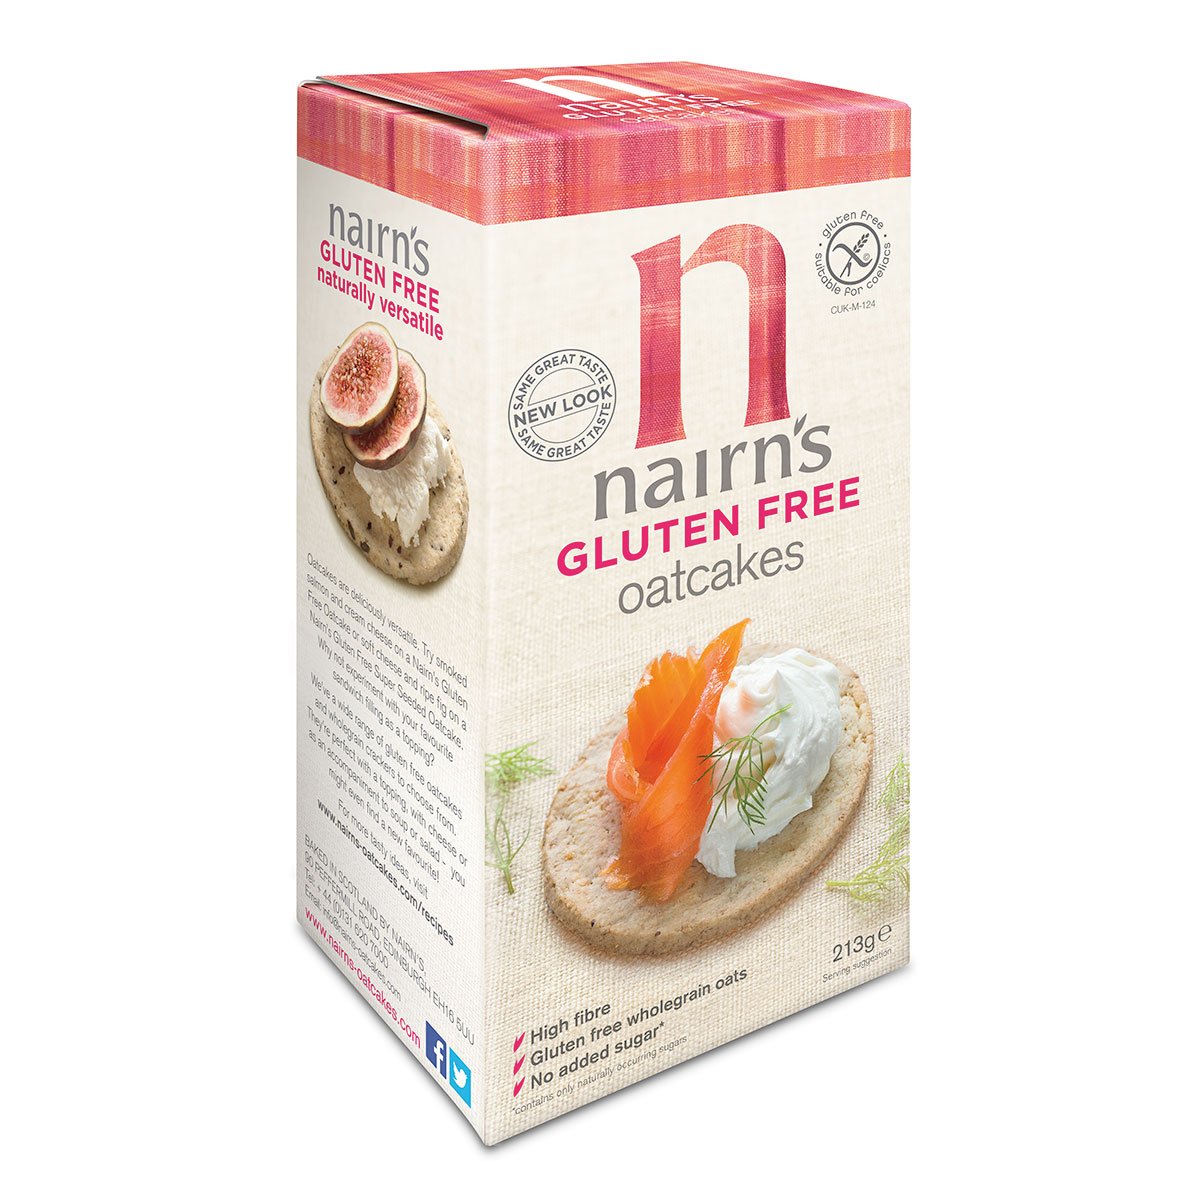 Nairns Gluten Free Oatcakes 213g - Just Natural